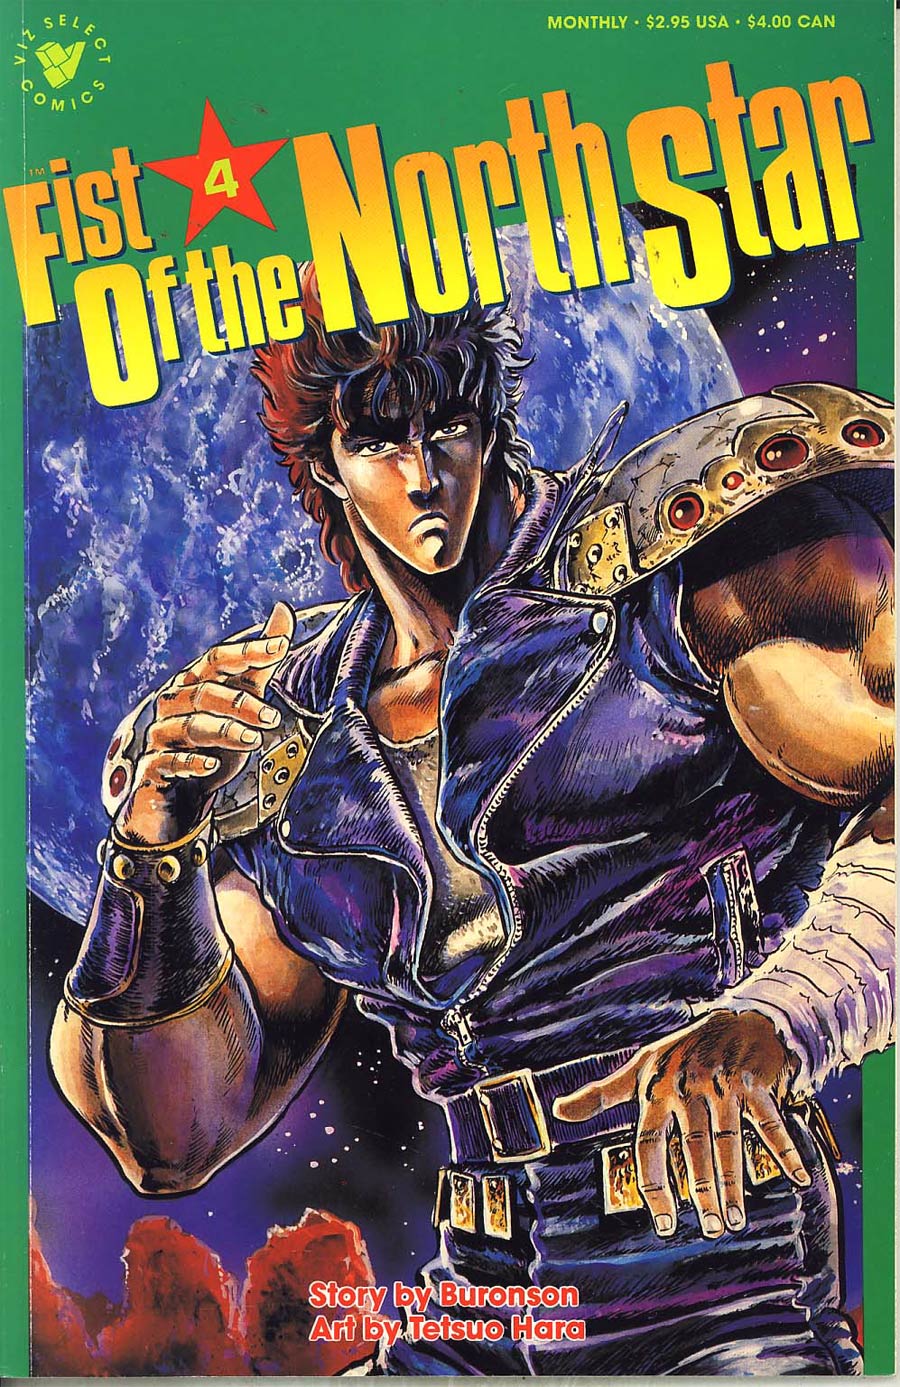 Fist Of The North Star Part 1 #4